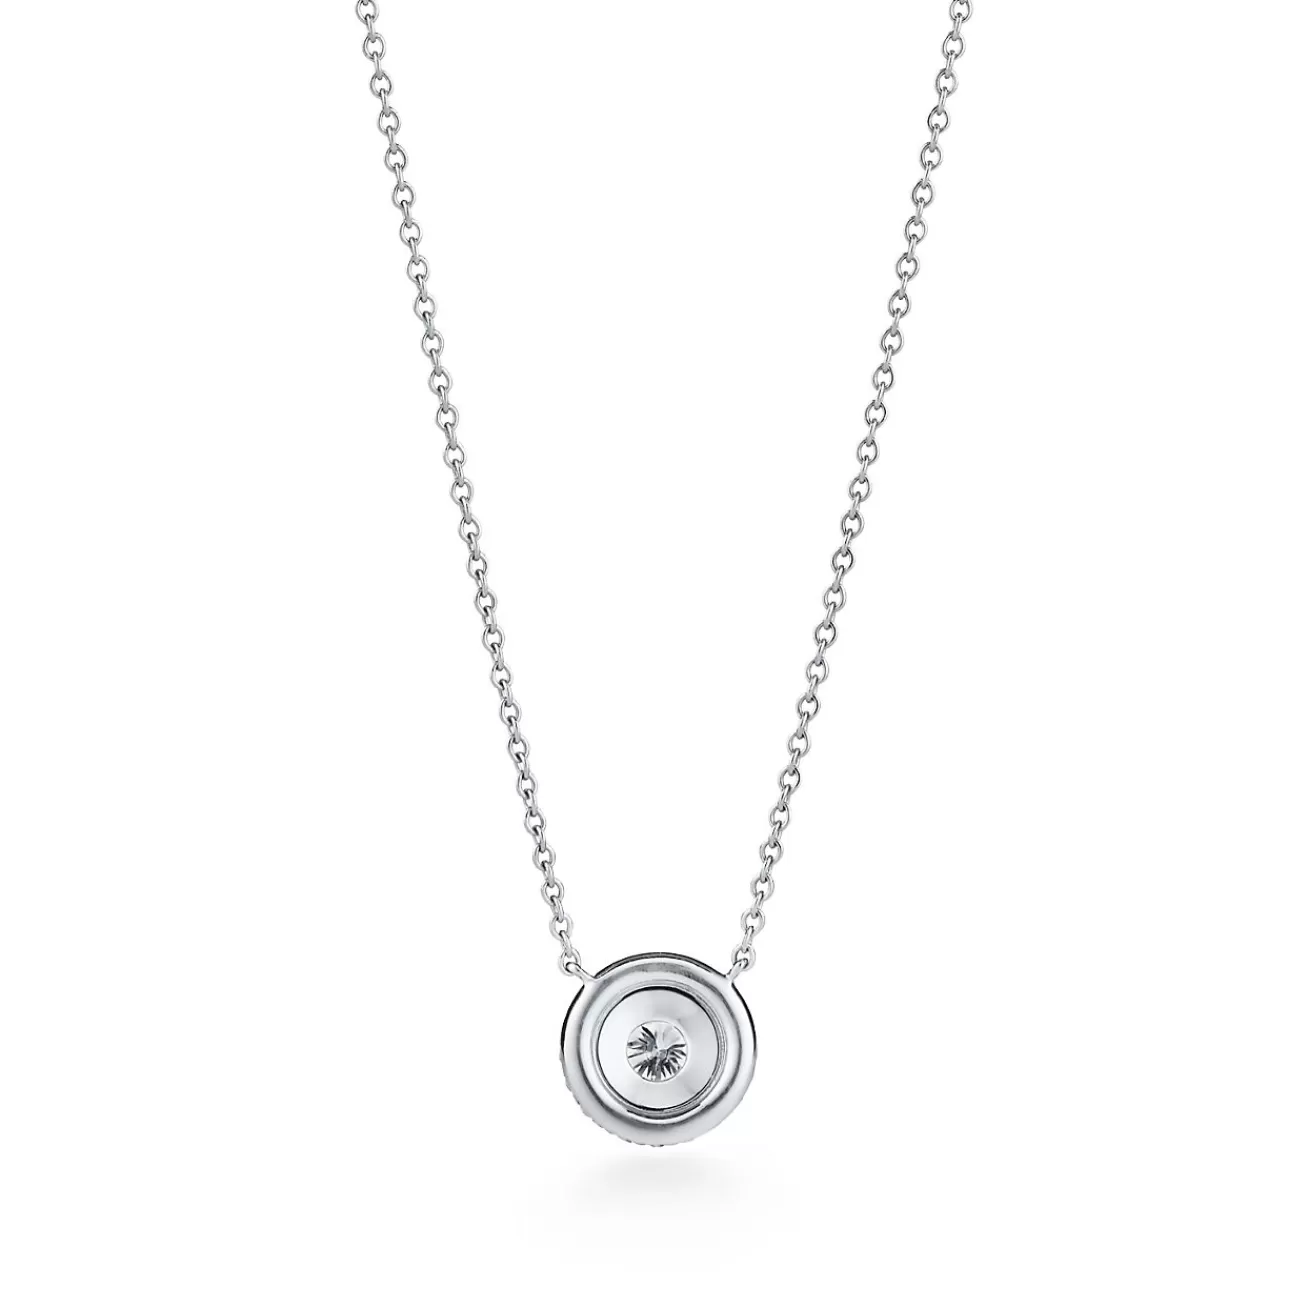 Tiffany & Co. Tiffany Soleste® pendant in platinum with round brilliant diamonds. | ^ Necklaces & Pendants | Gifts for Her